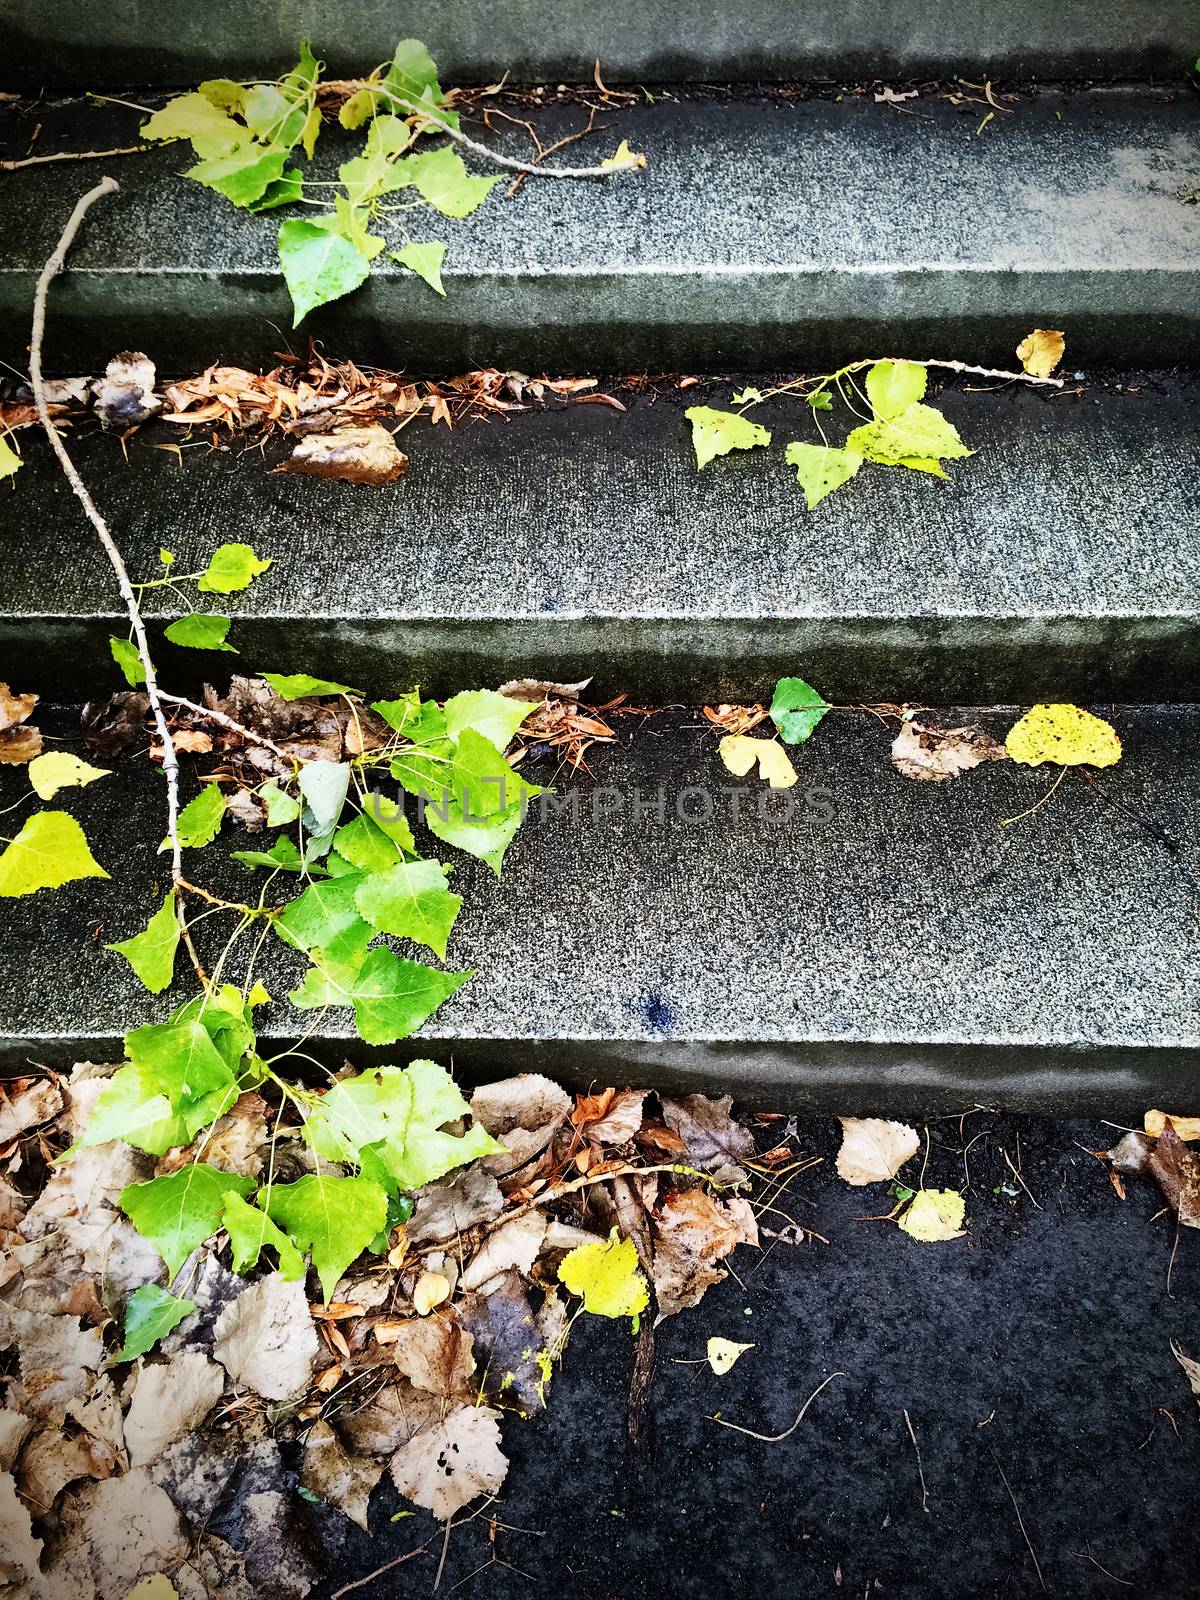 Branches and autumn leaves on stone steps.